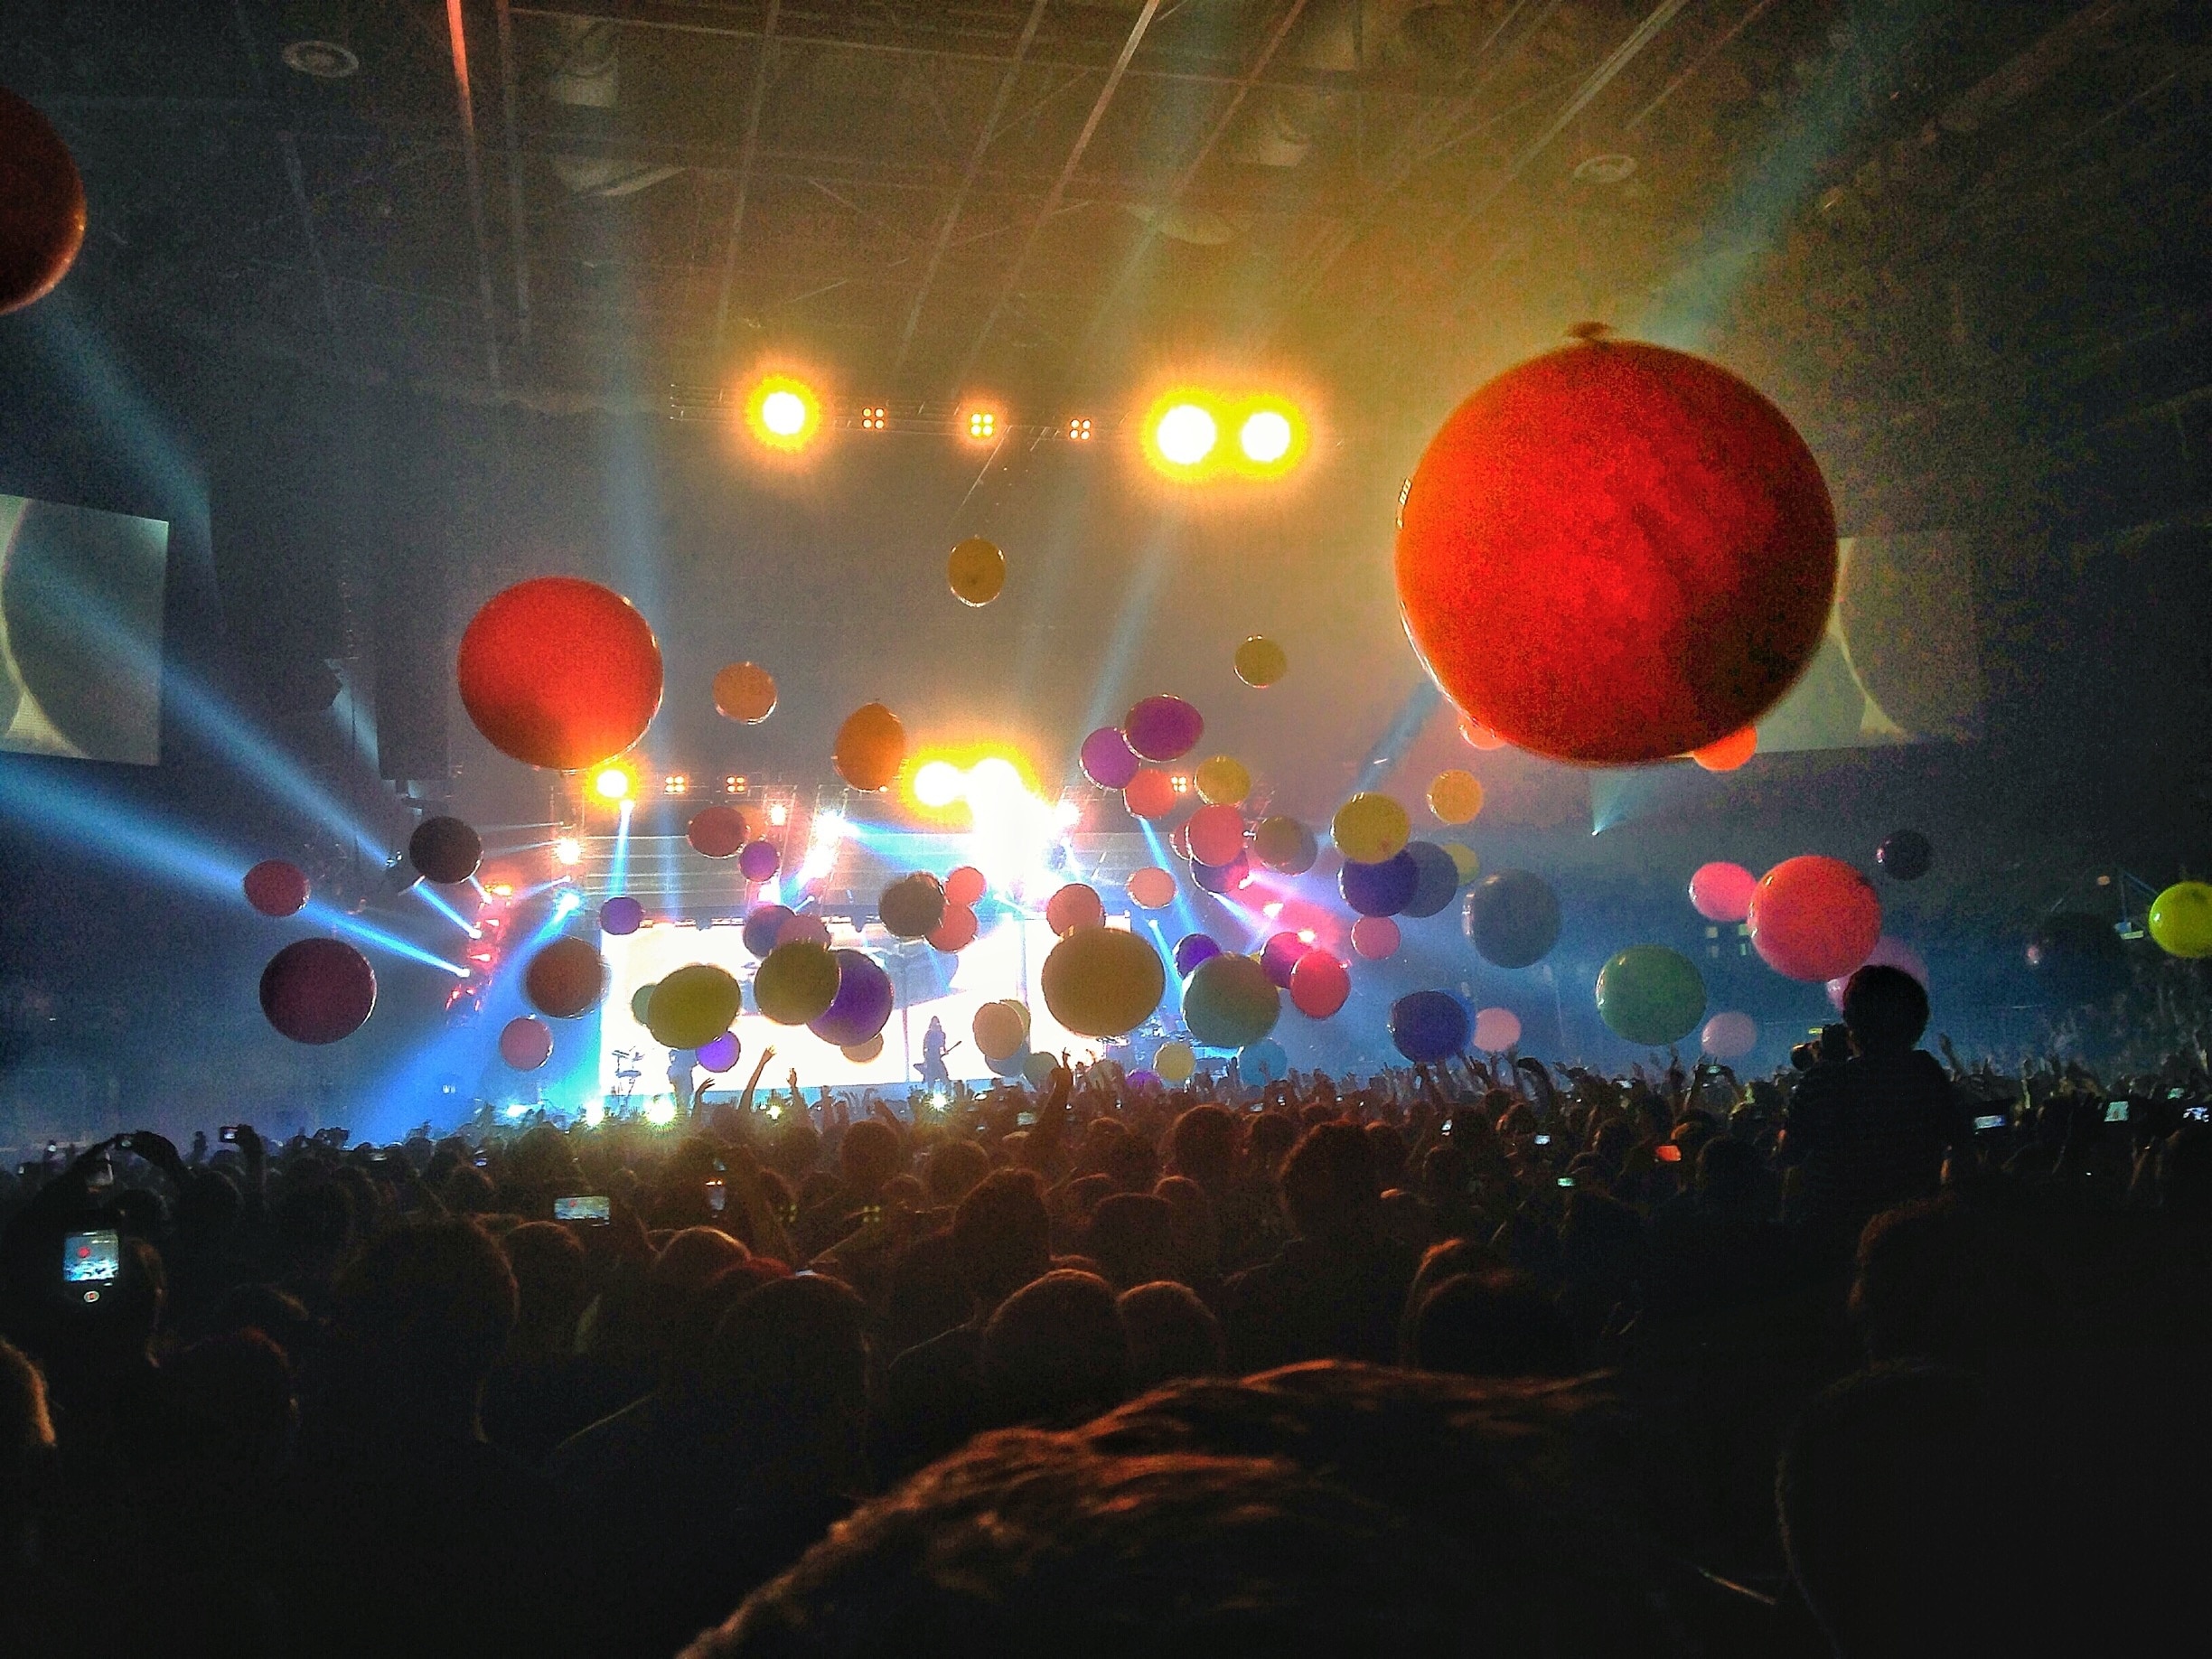 30 Seconds to Mars released giant balloons at a gig